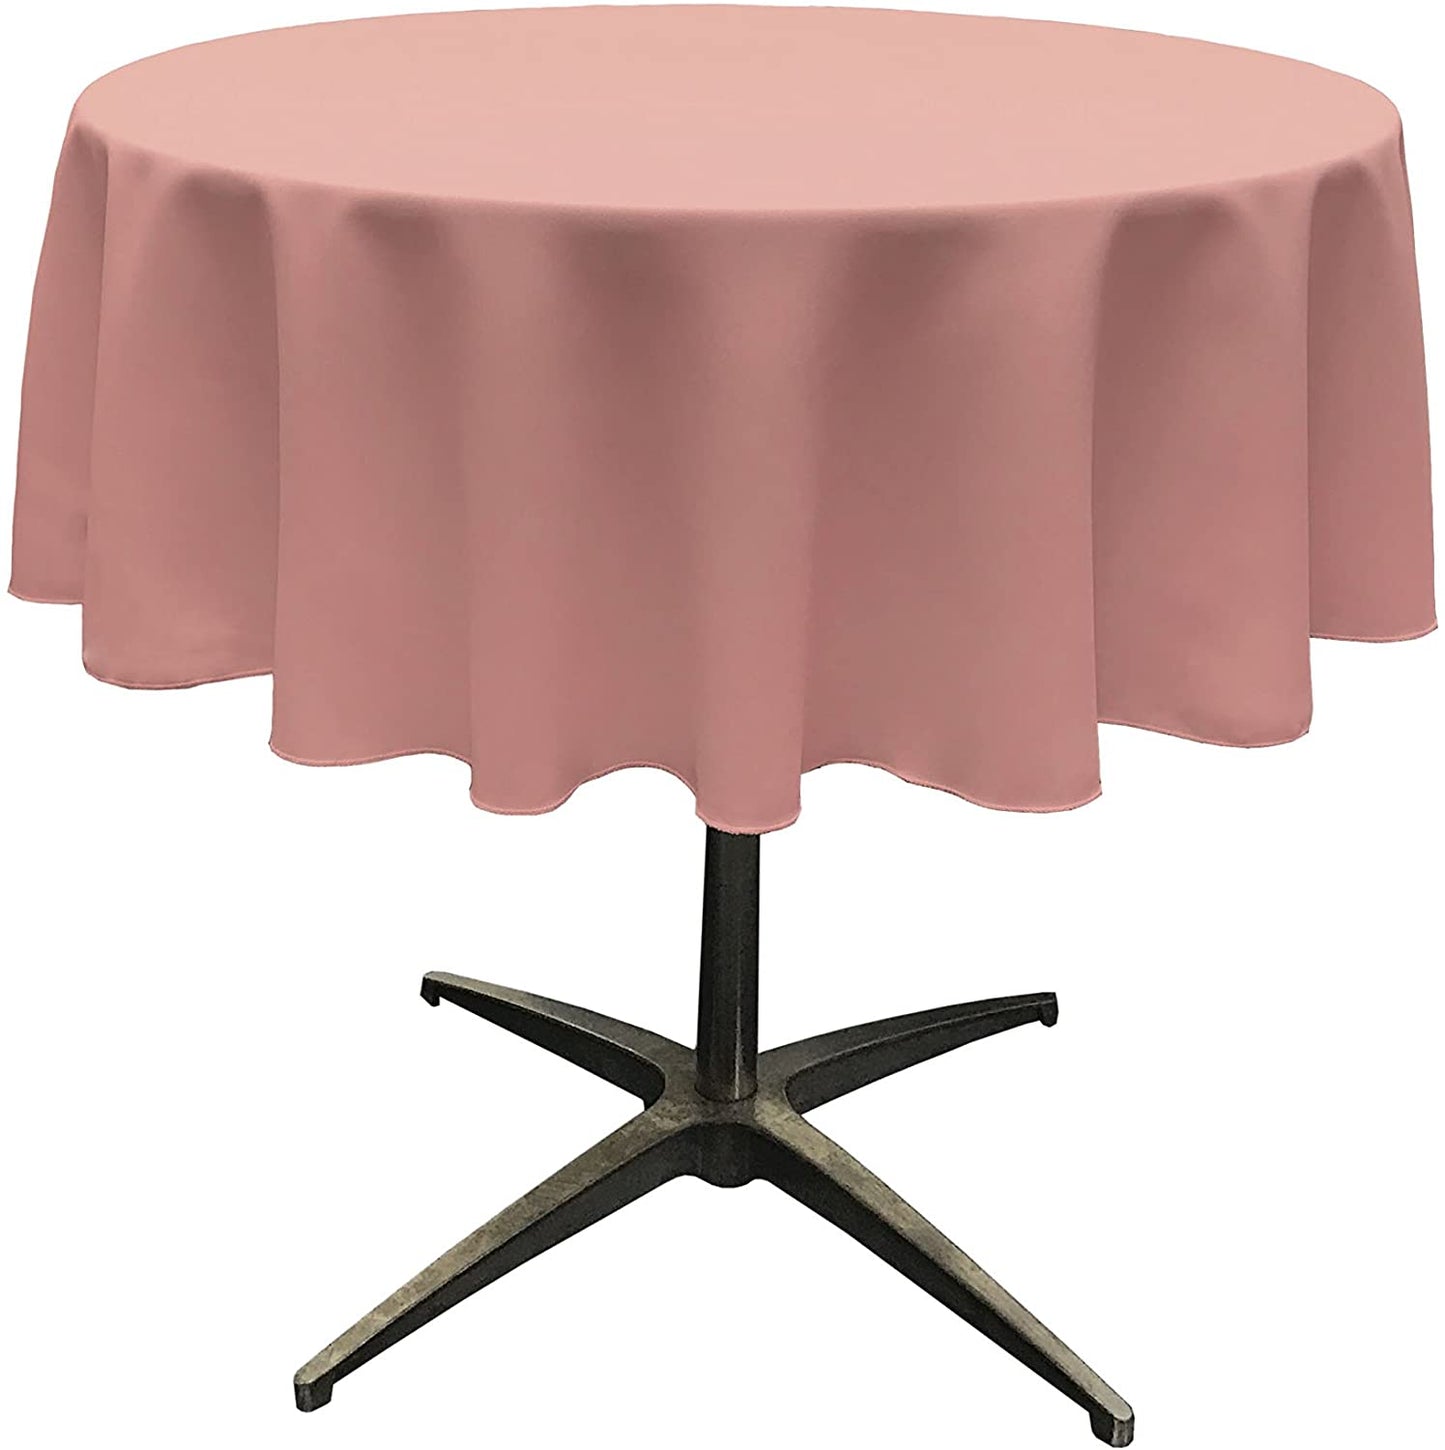 Polyester Poplin Washable Round Tablecloth, Stain and Wrinkle Resistant Table Cover Dusty Rose